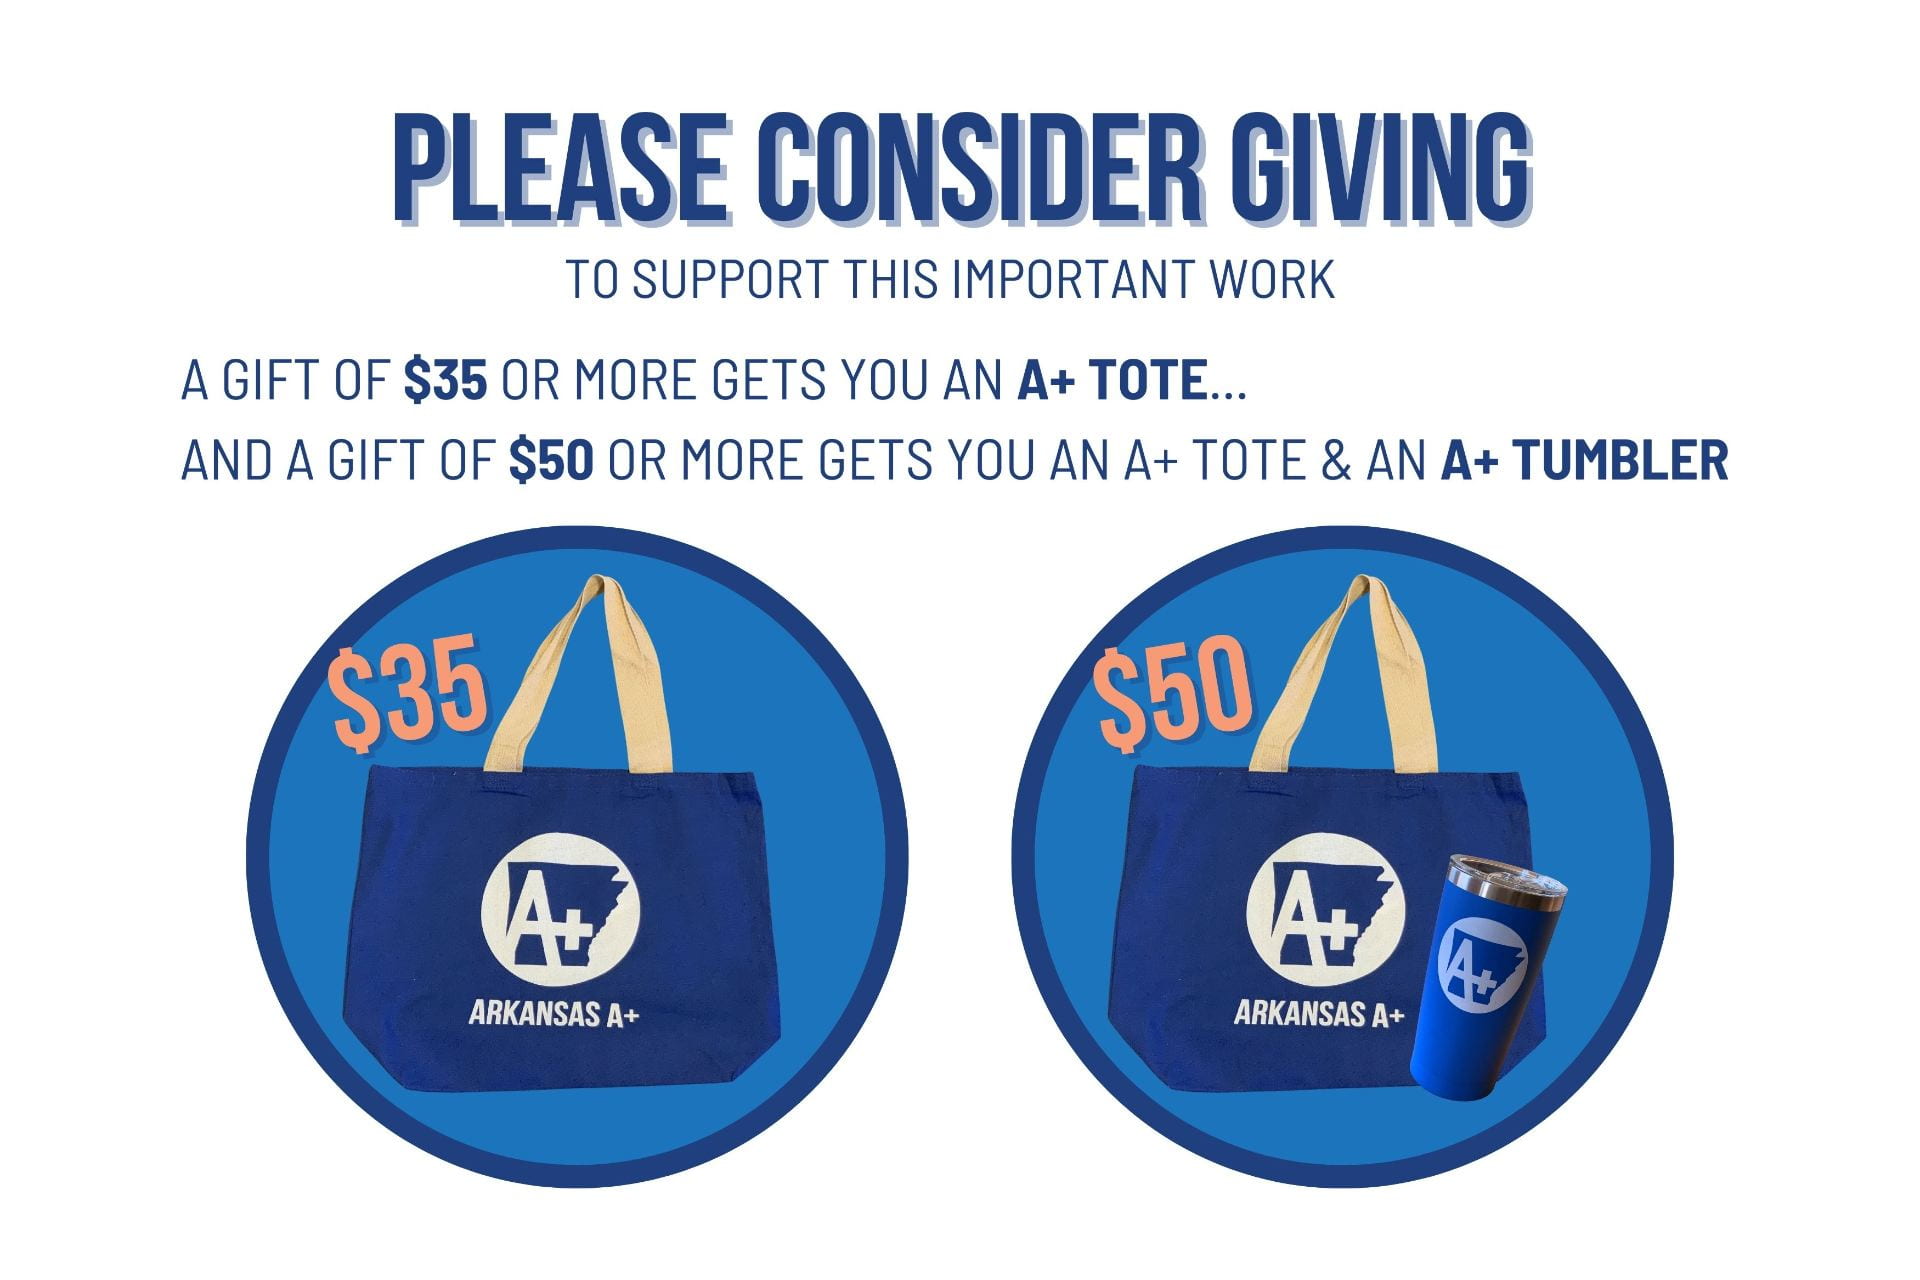 Infographic reading: "Please consider giving to support this important work. A gift of $35 or more gets you an A-Plus tote, and a gift of $50 or more gets you an A-Plus tote and an A-Plus tumbler.